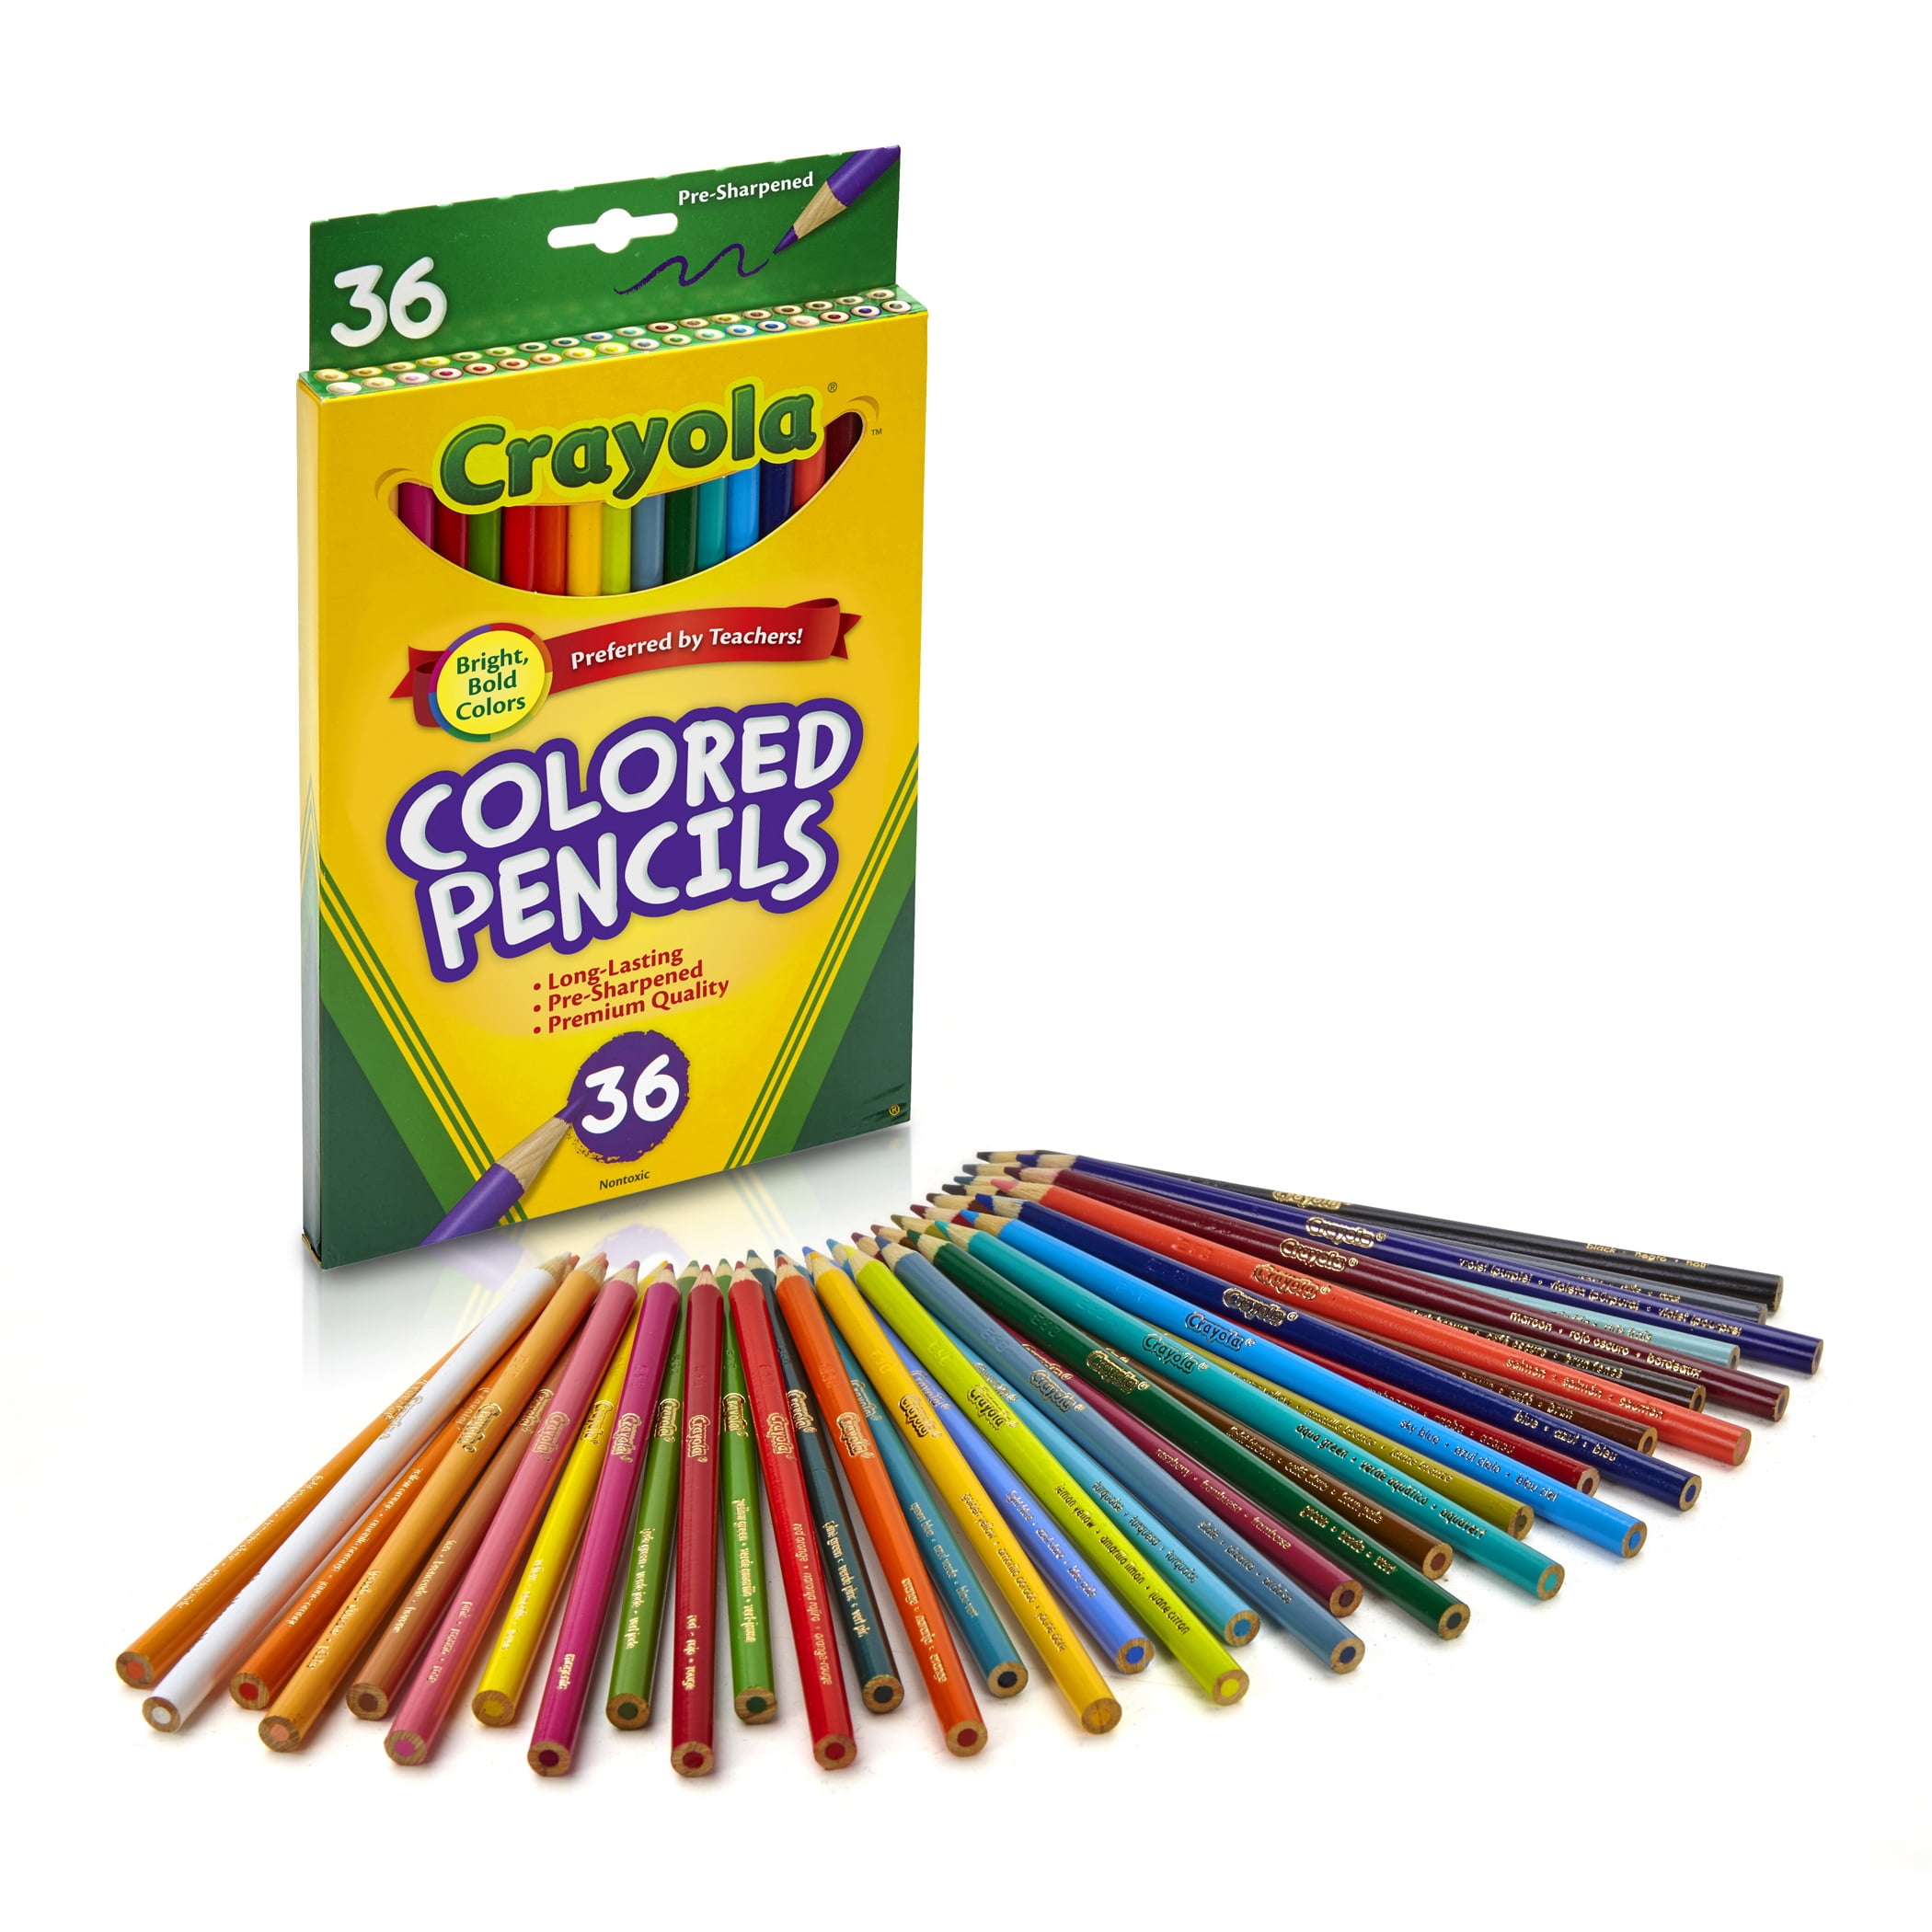 Crayola 50 Count Colored Pencils: What's Inside the Box